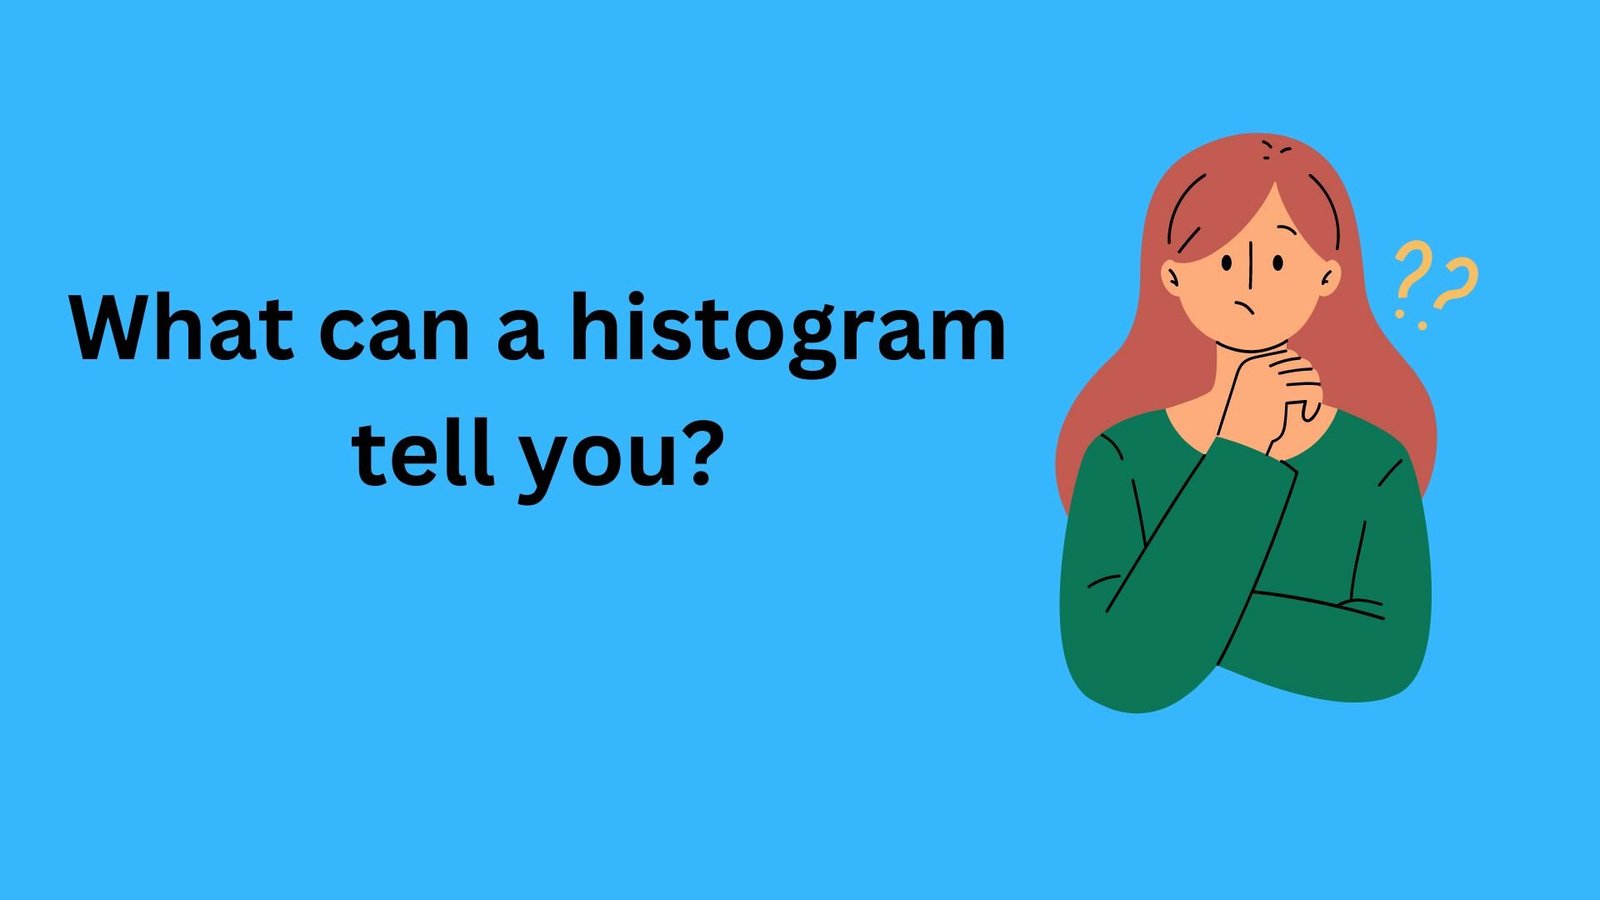 What can a histogram tell you?